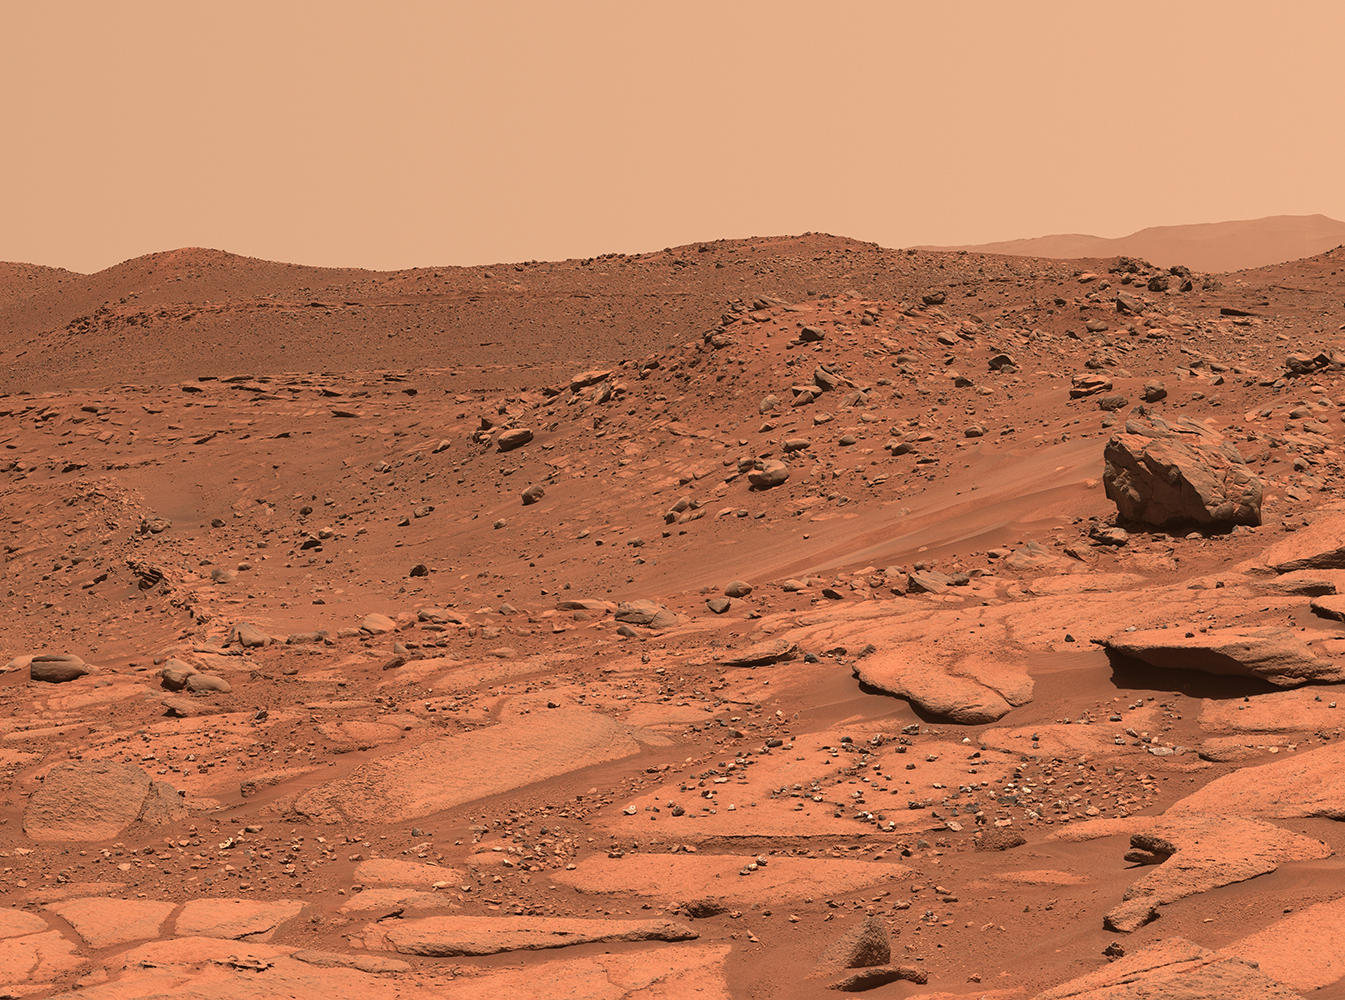 Image of Mars' rusty colored, dry rocky surface, taken by the Perseverance Rover.